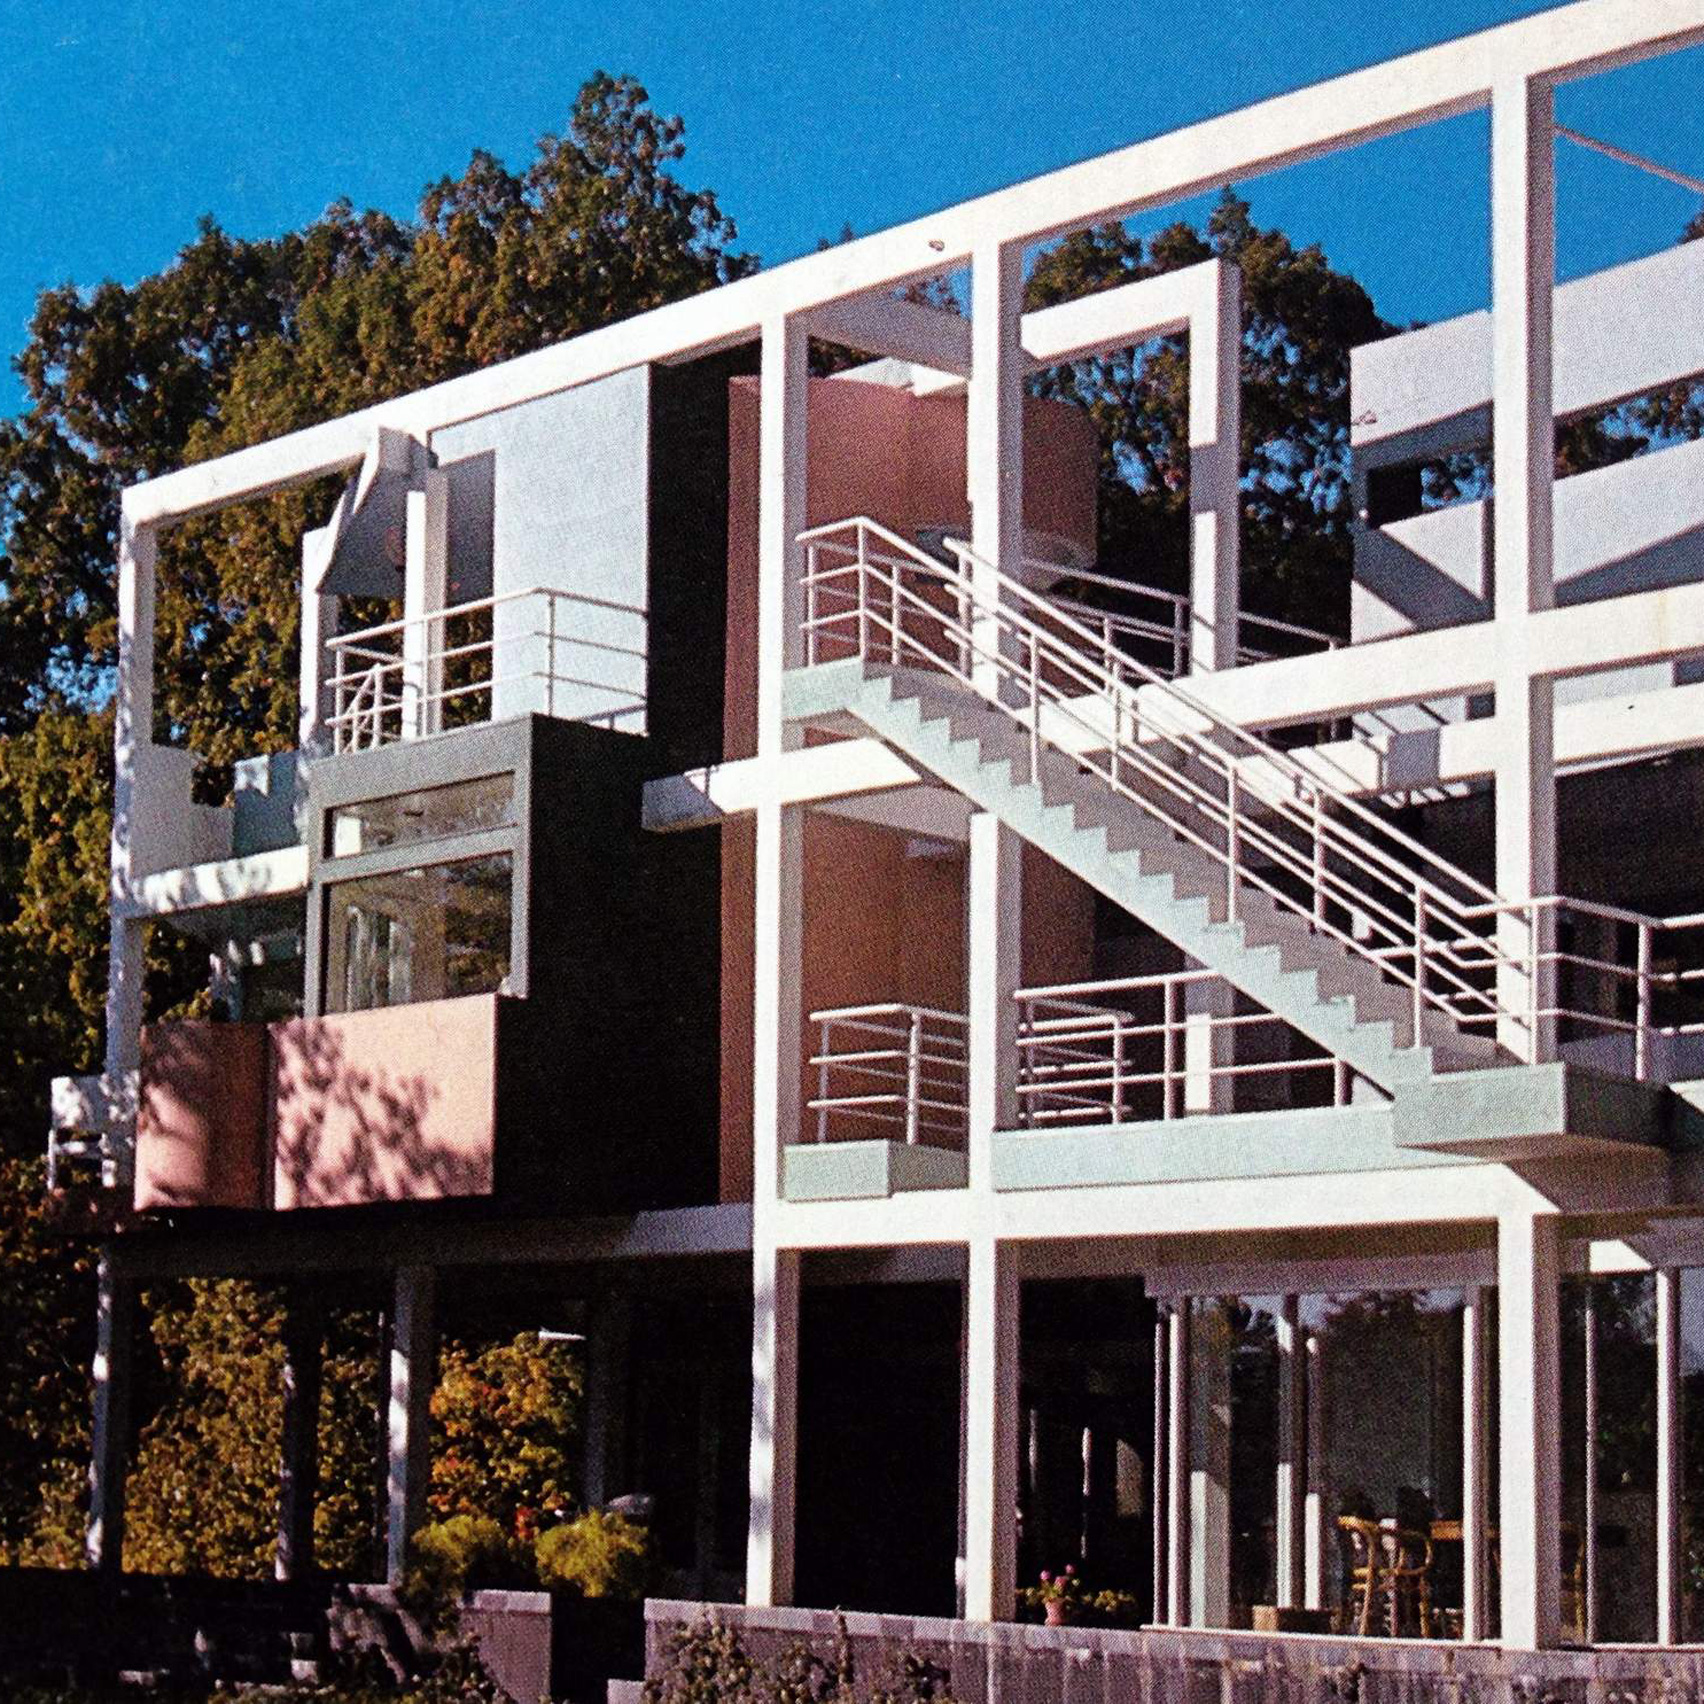 Snyderman House by Michael Graves, 1972